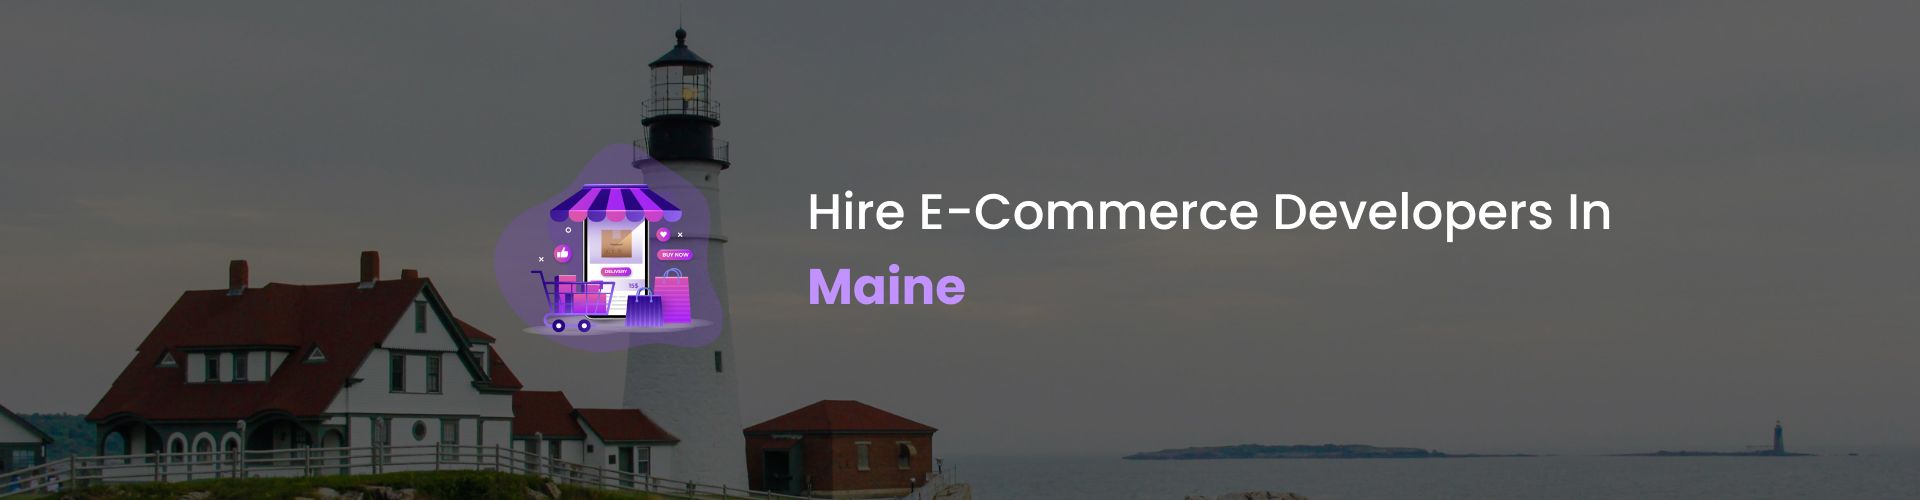 hire ecommerce developers in maine